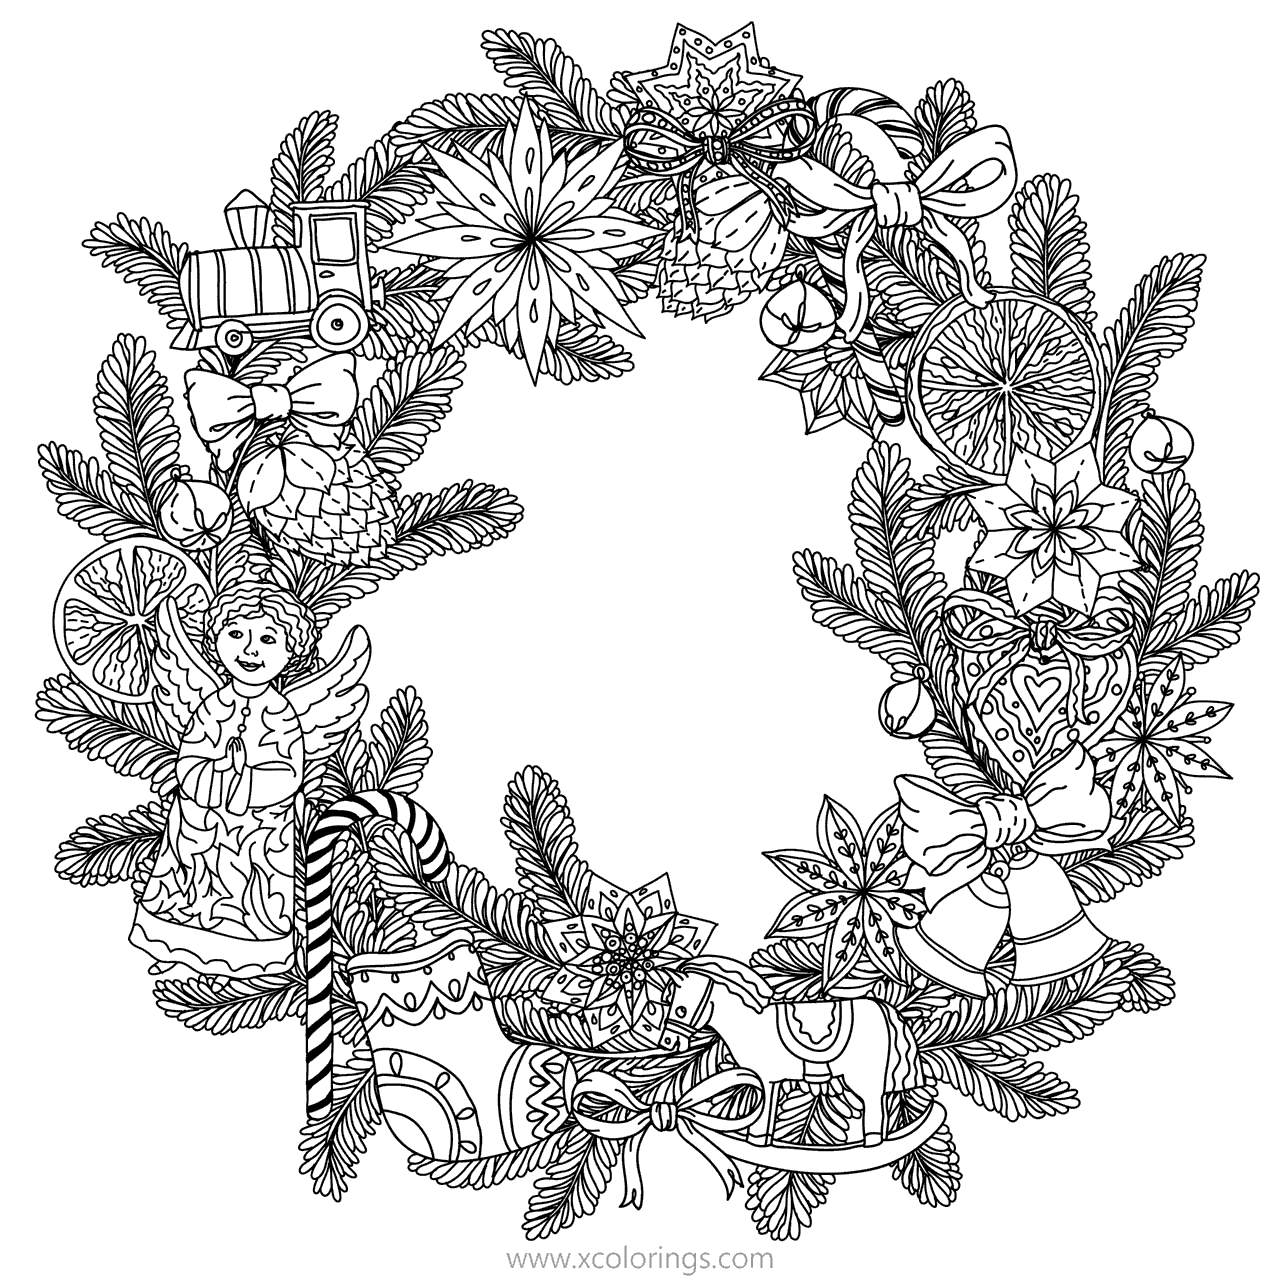 Free Christmas Wreath Coloring Pages by mashabr printable